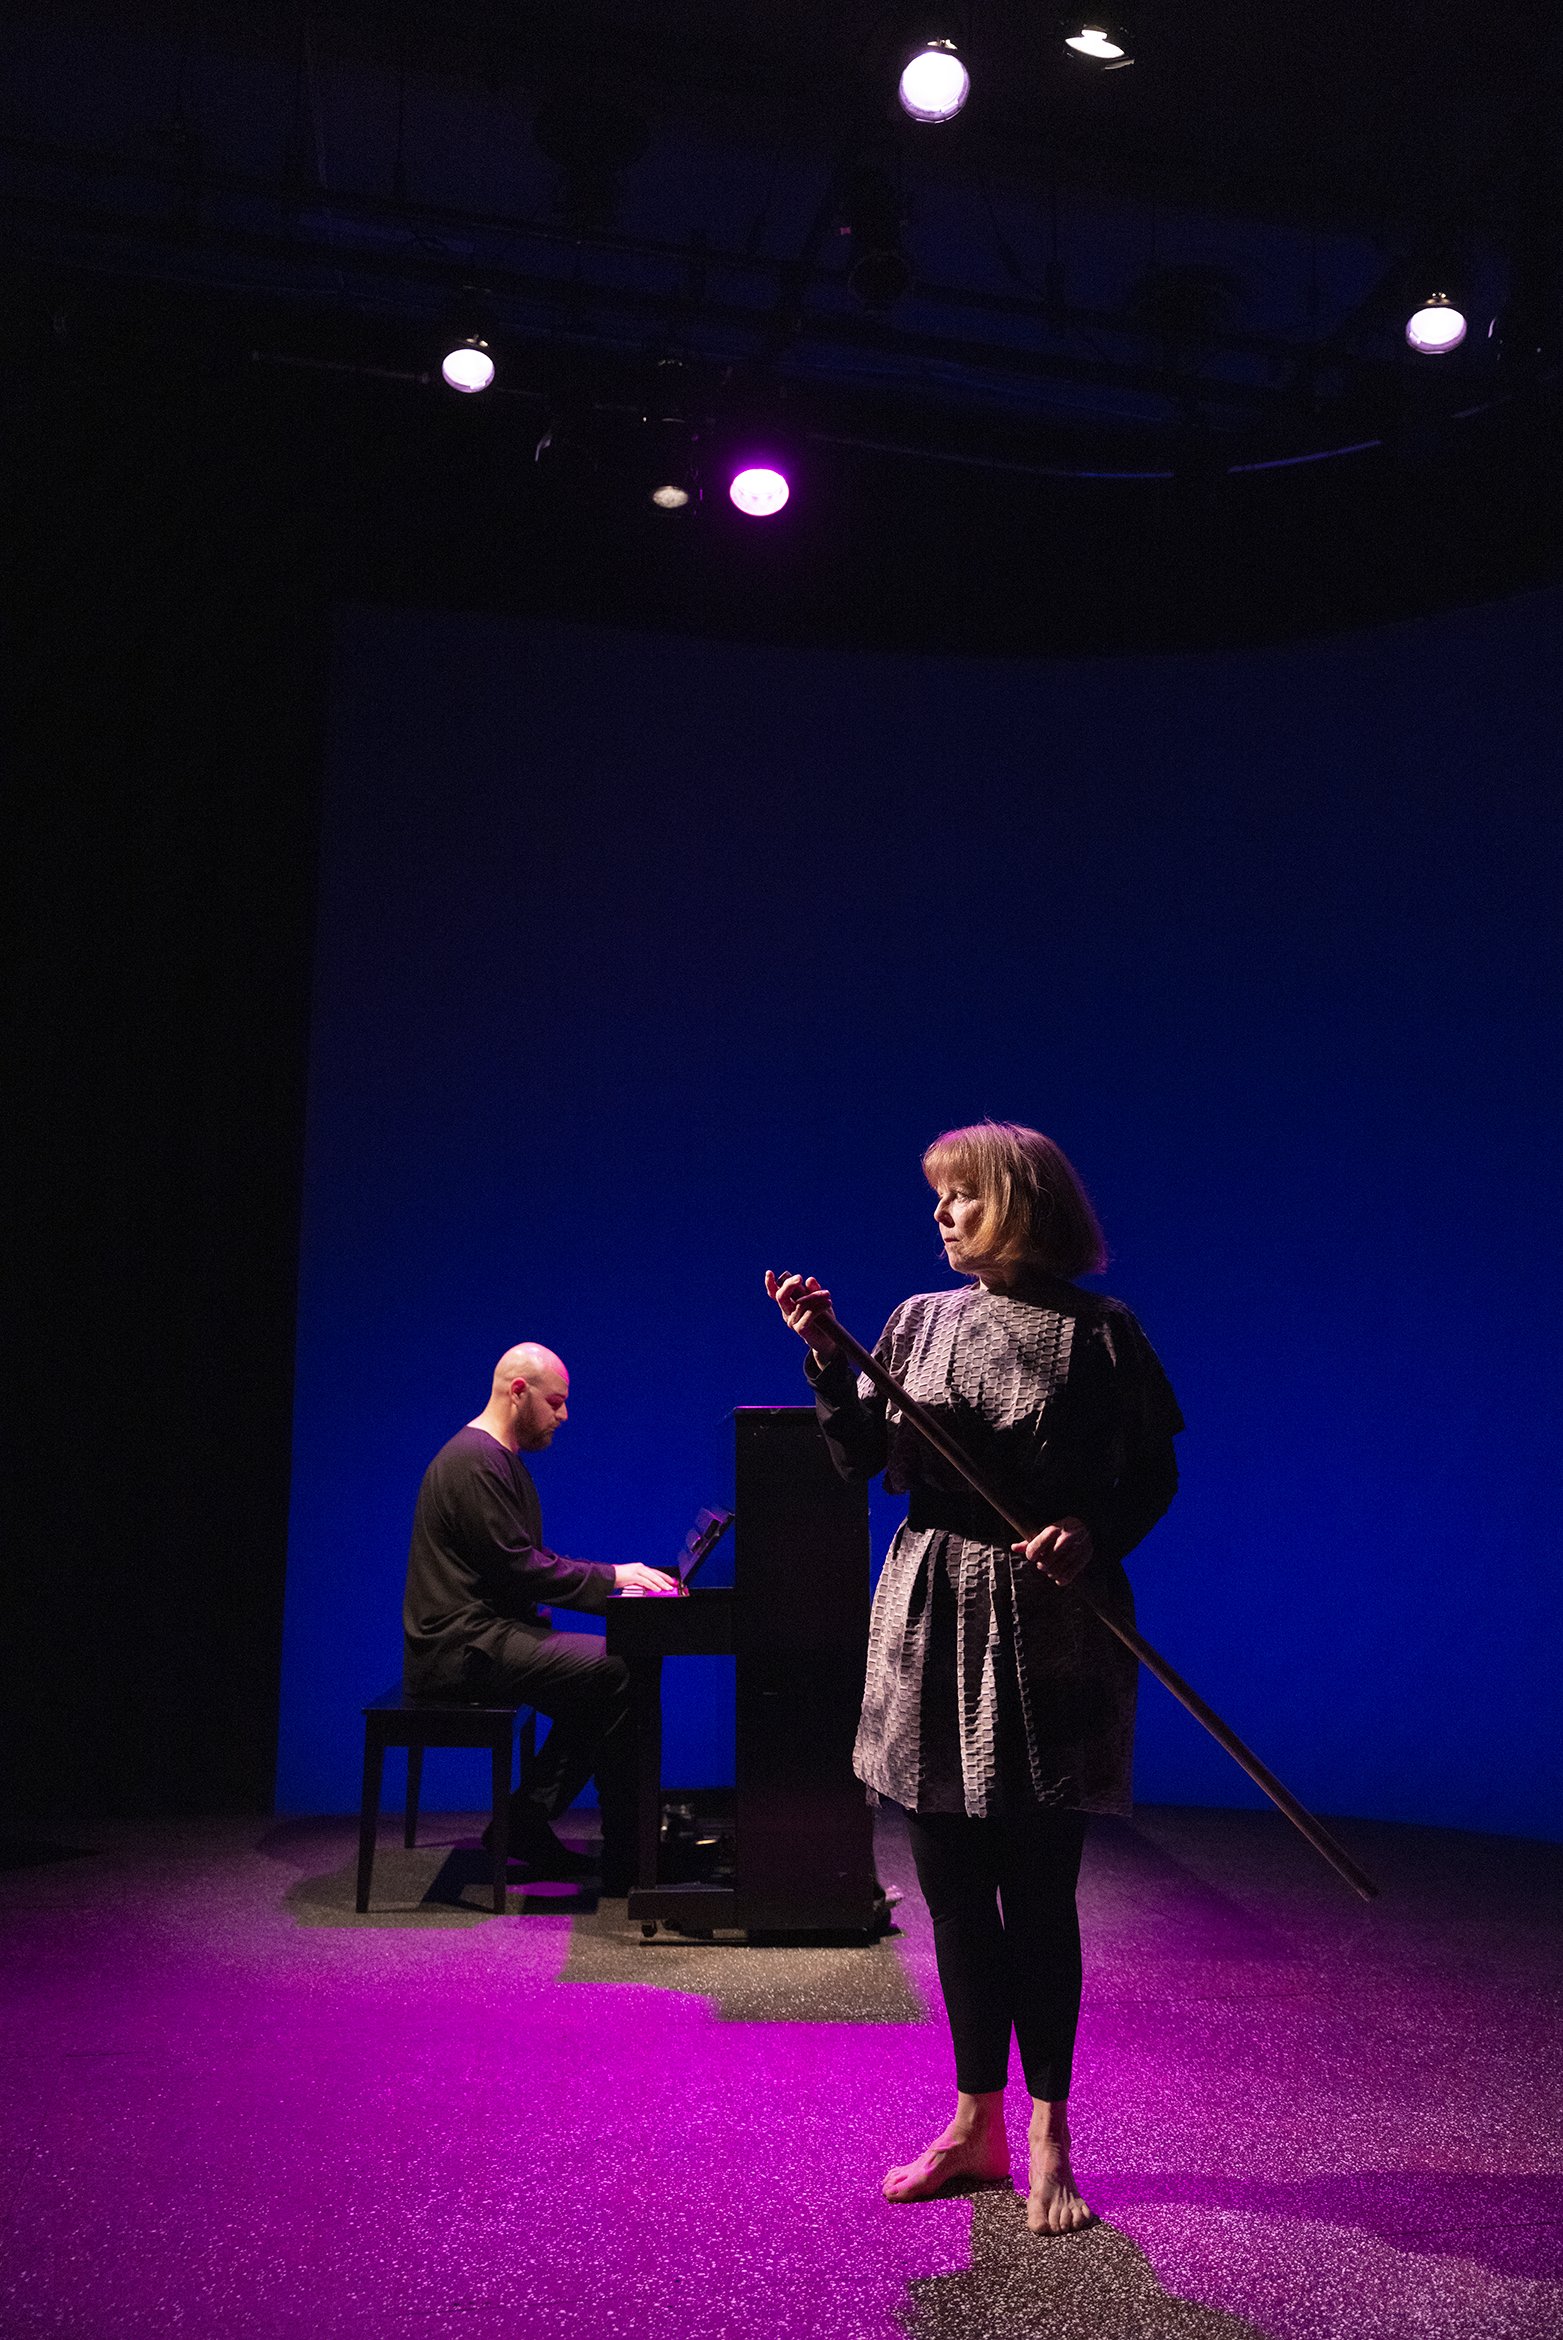 Patty Gallagher as The Poet and Jake Sorgen as The Muse. Photo by Tim Fuller.